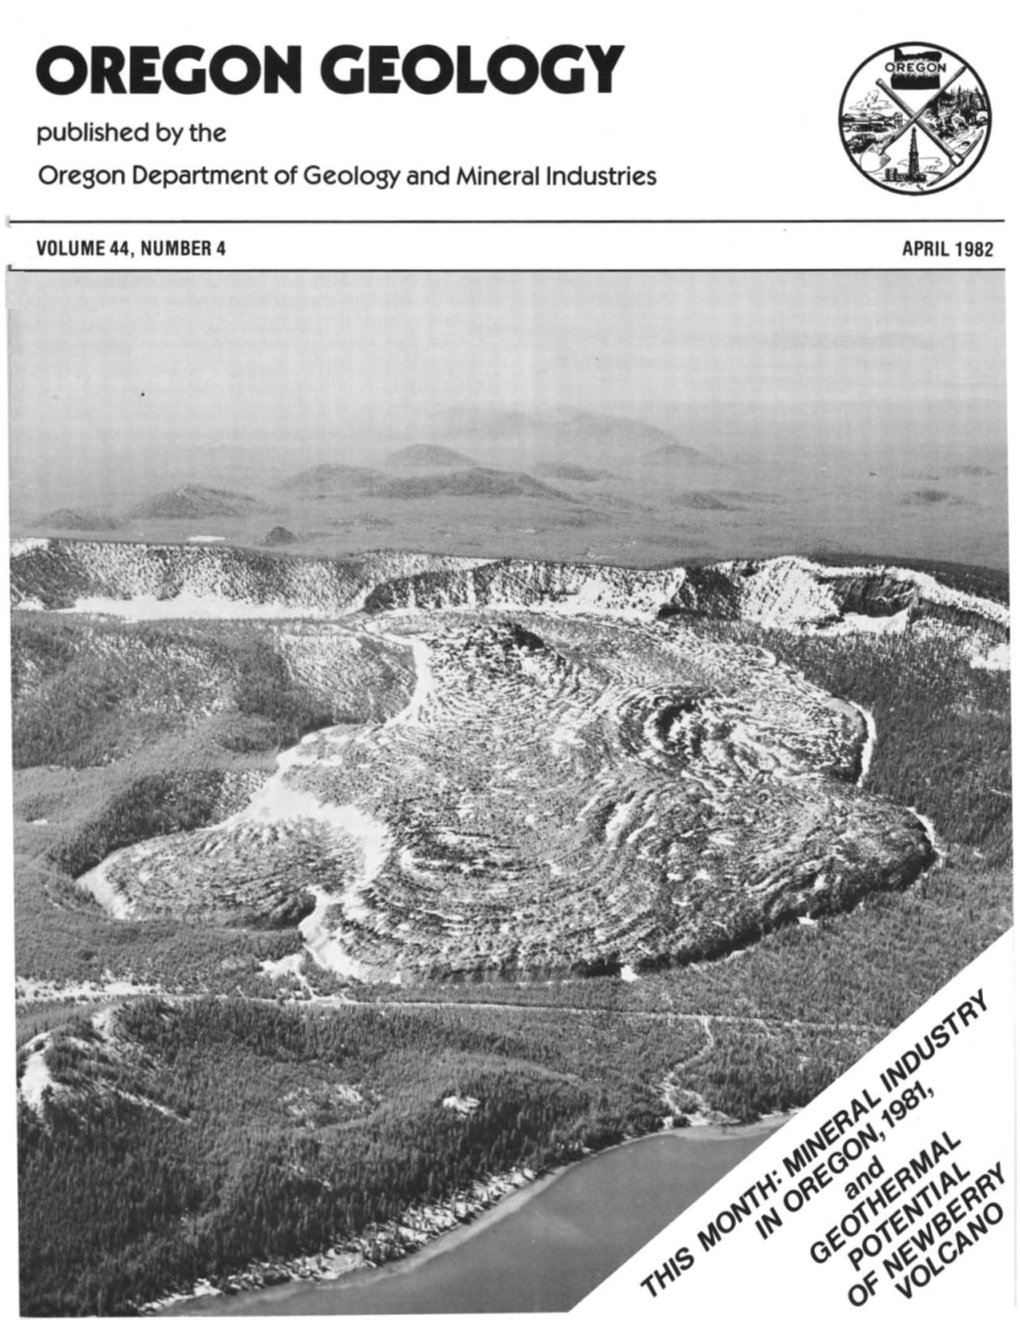 Orecion Cieolociy Published by the Oregon Department of Geology and Mineral Industries